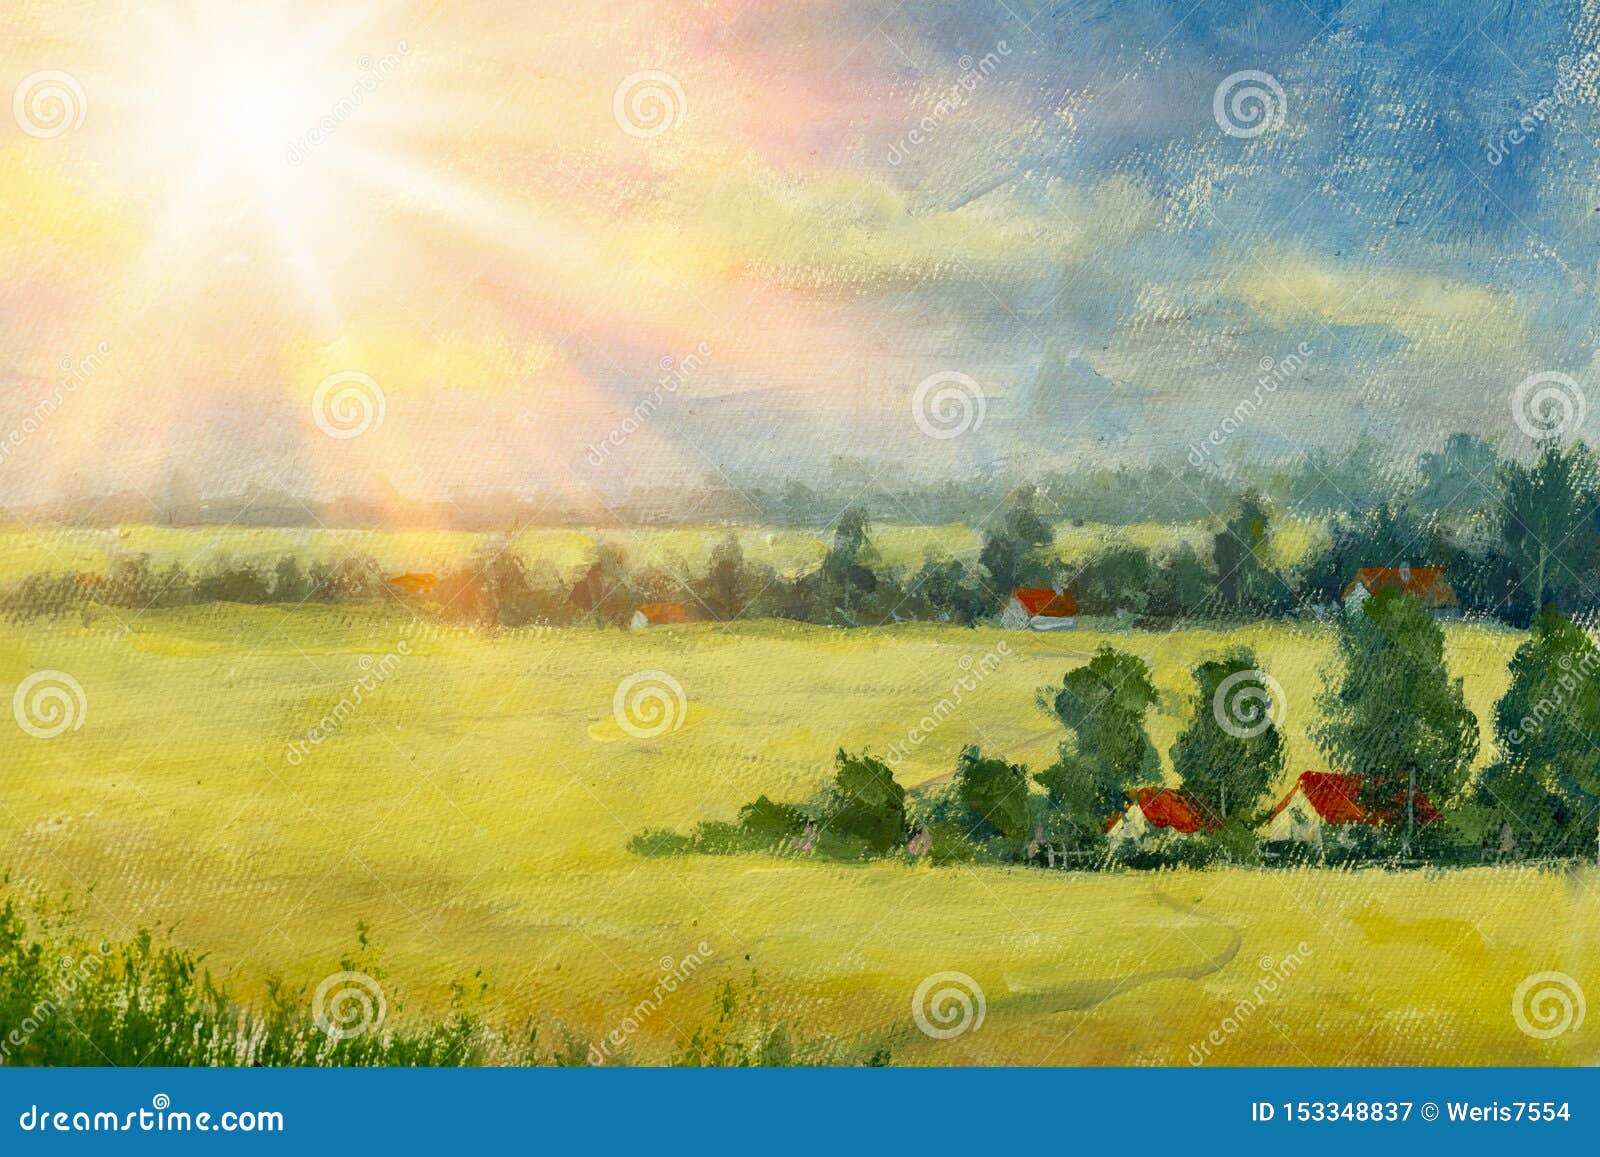 beautiful acrylic painting canvas sunny country landscape summer nature yellow flowering field farm houses village 153348837